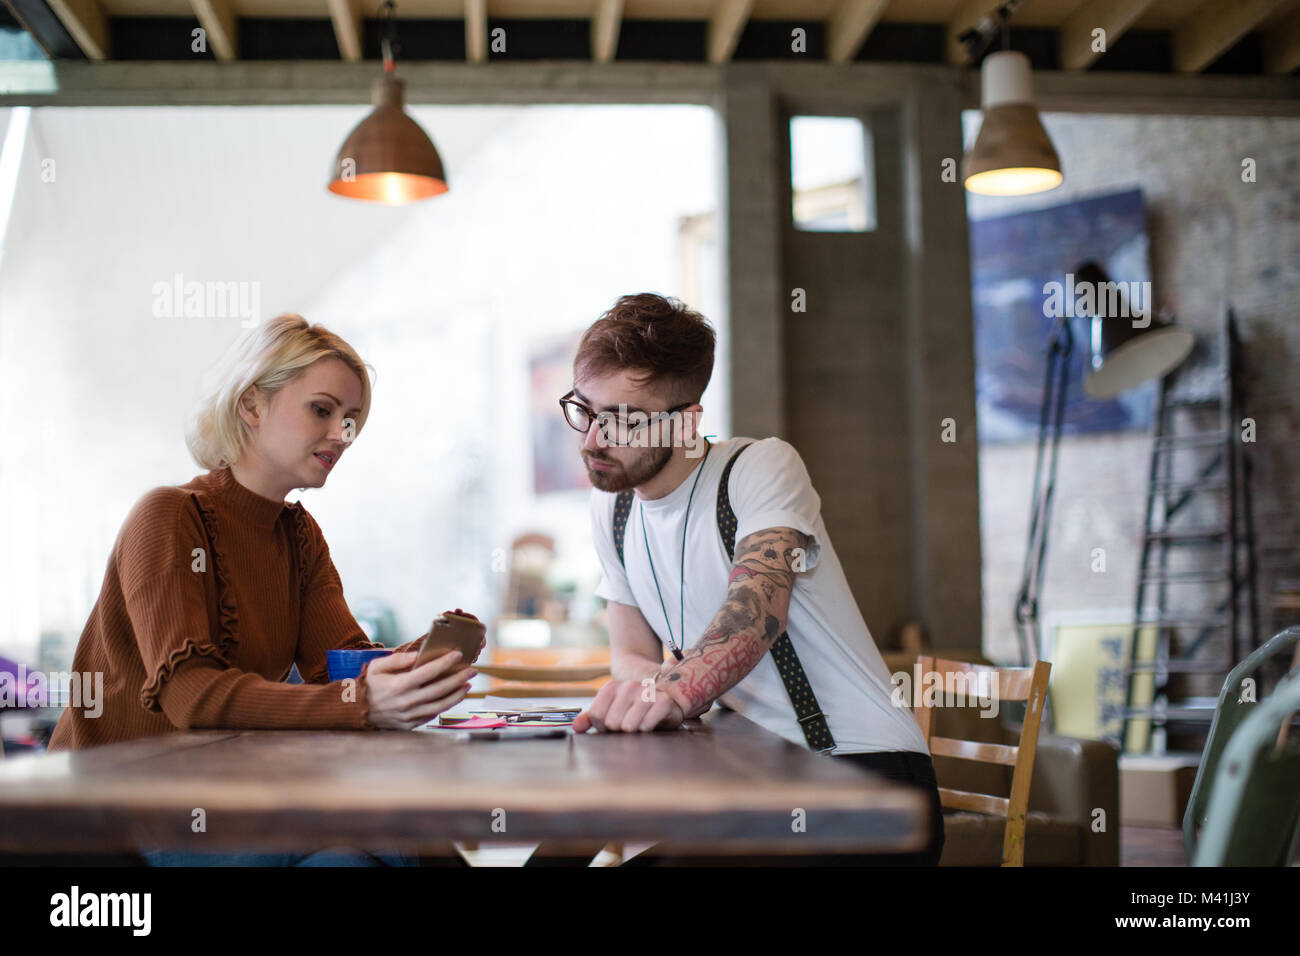 Two entrepreneurs in a business meeting Stock Photo